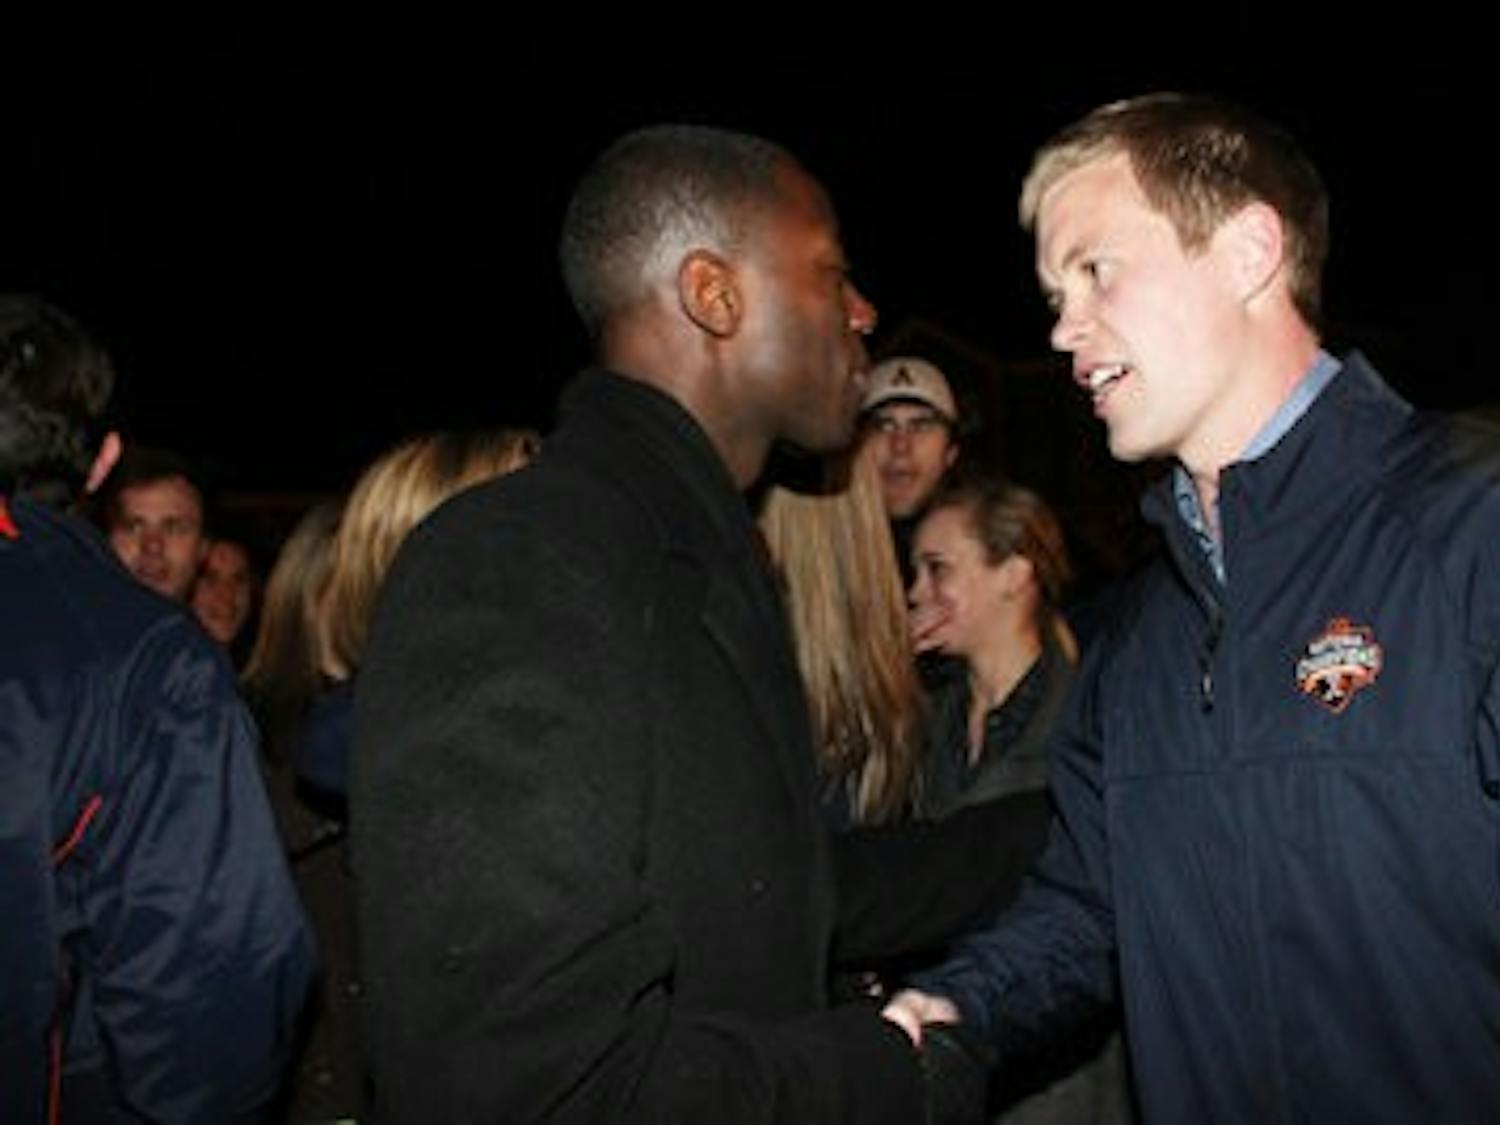 Turnage shakes hands with runner up Kel Jackson. Jackson received 2,184 votes, 32 percent. (Emily Adams / Photo Editor)